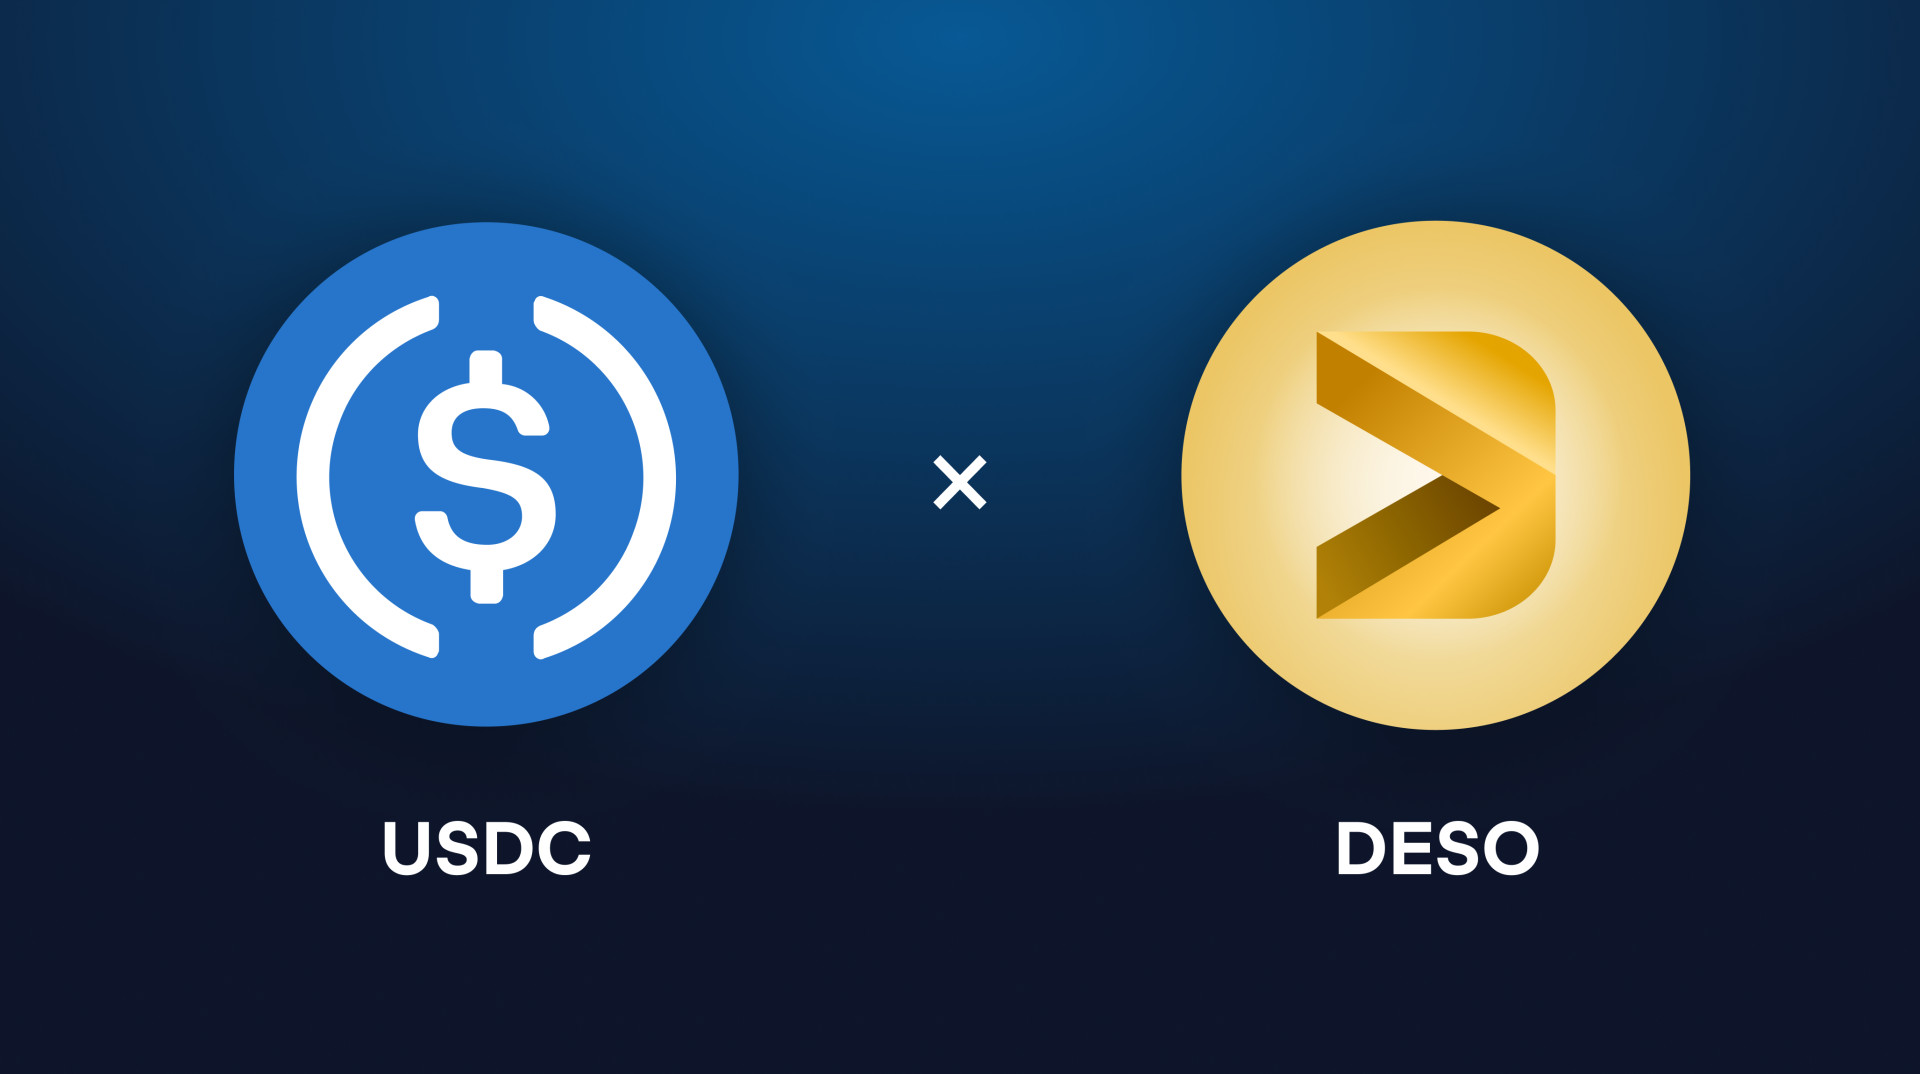 usdc-will-integrate-with-decentralized-social-to-bring-web3-to-the-masses-or-headlines-or-news-or-coinmarketcap